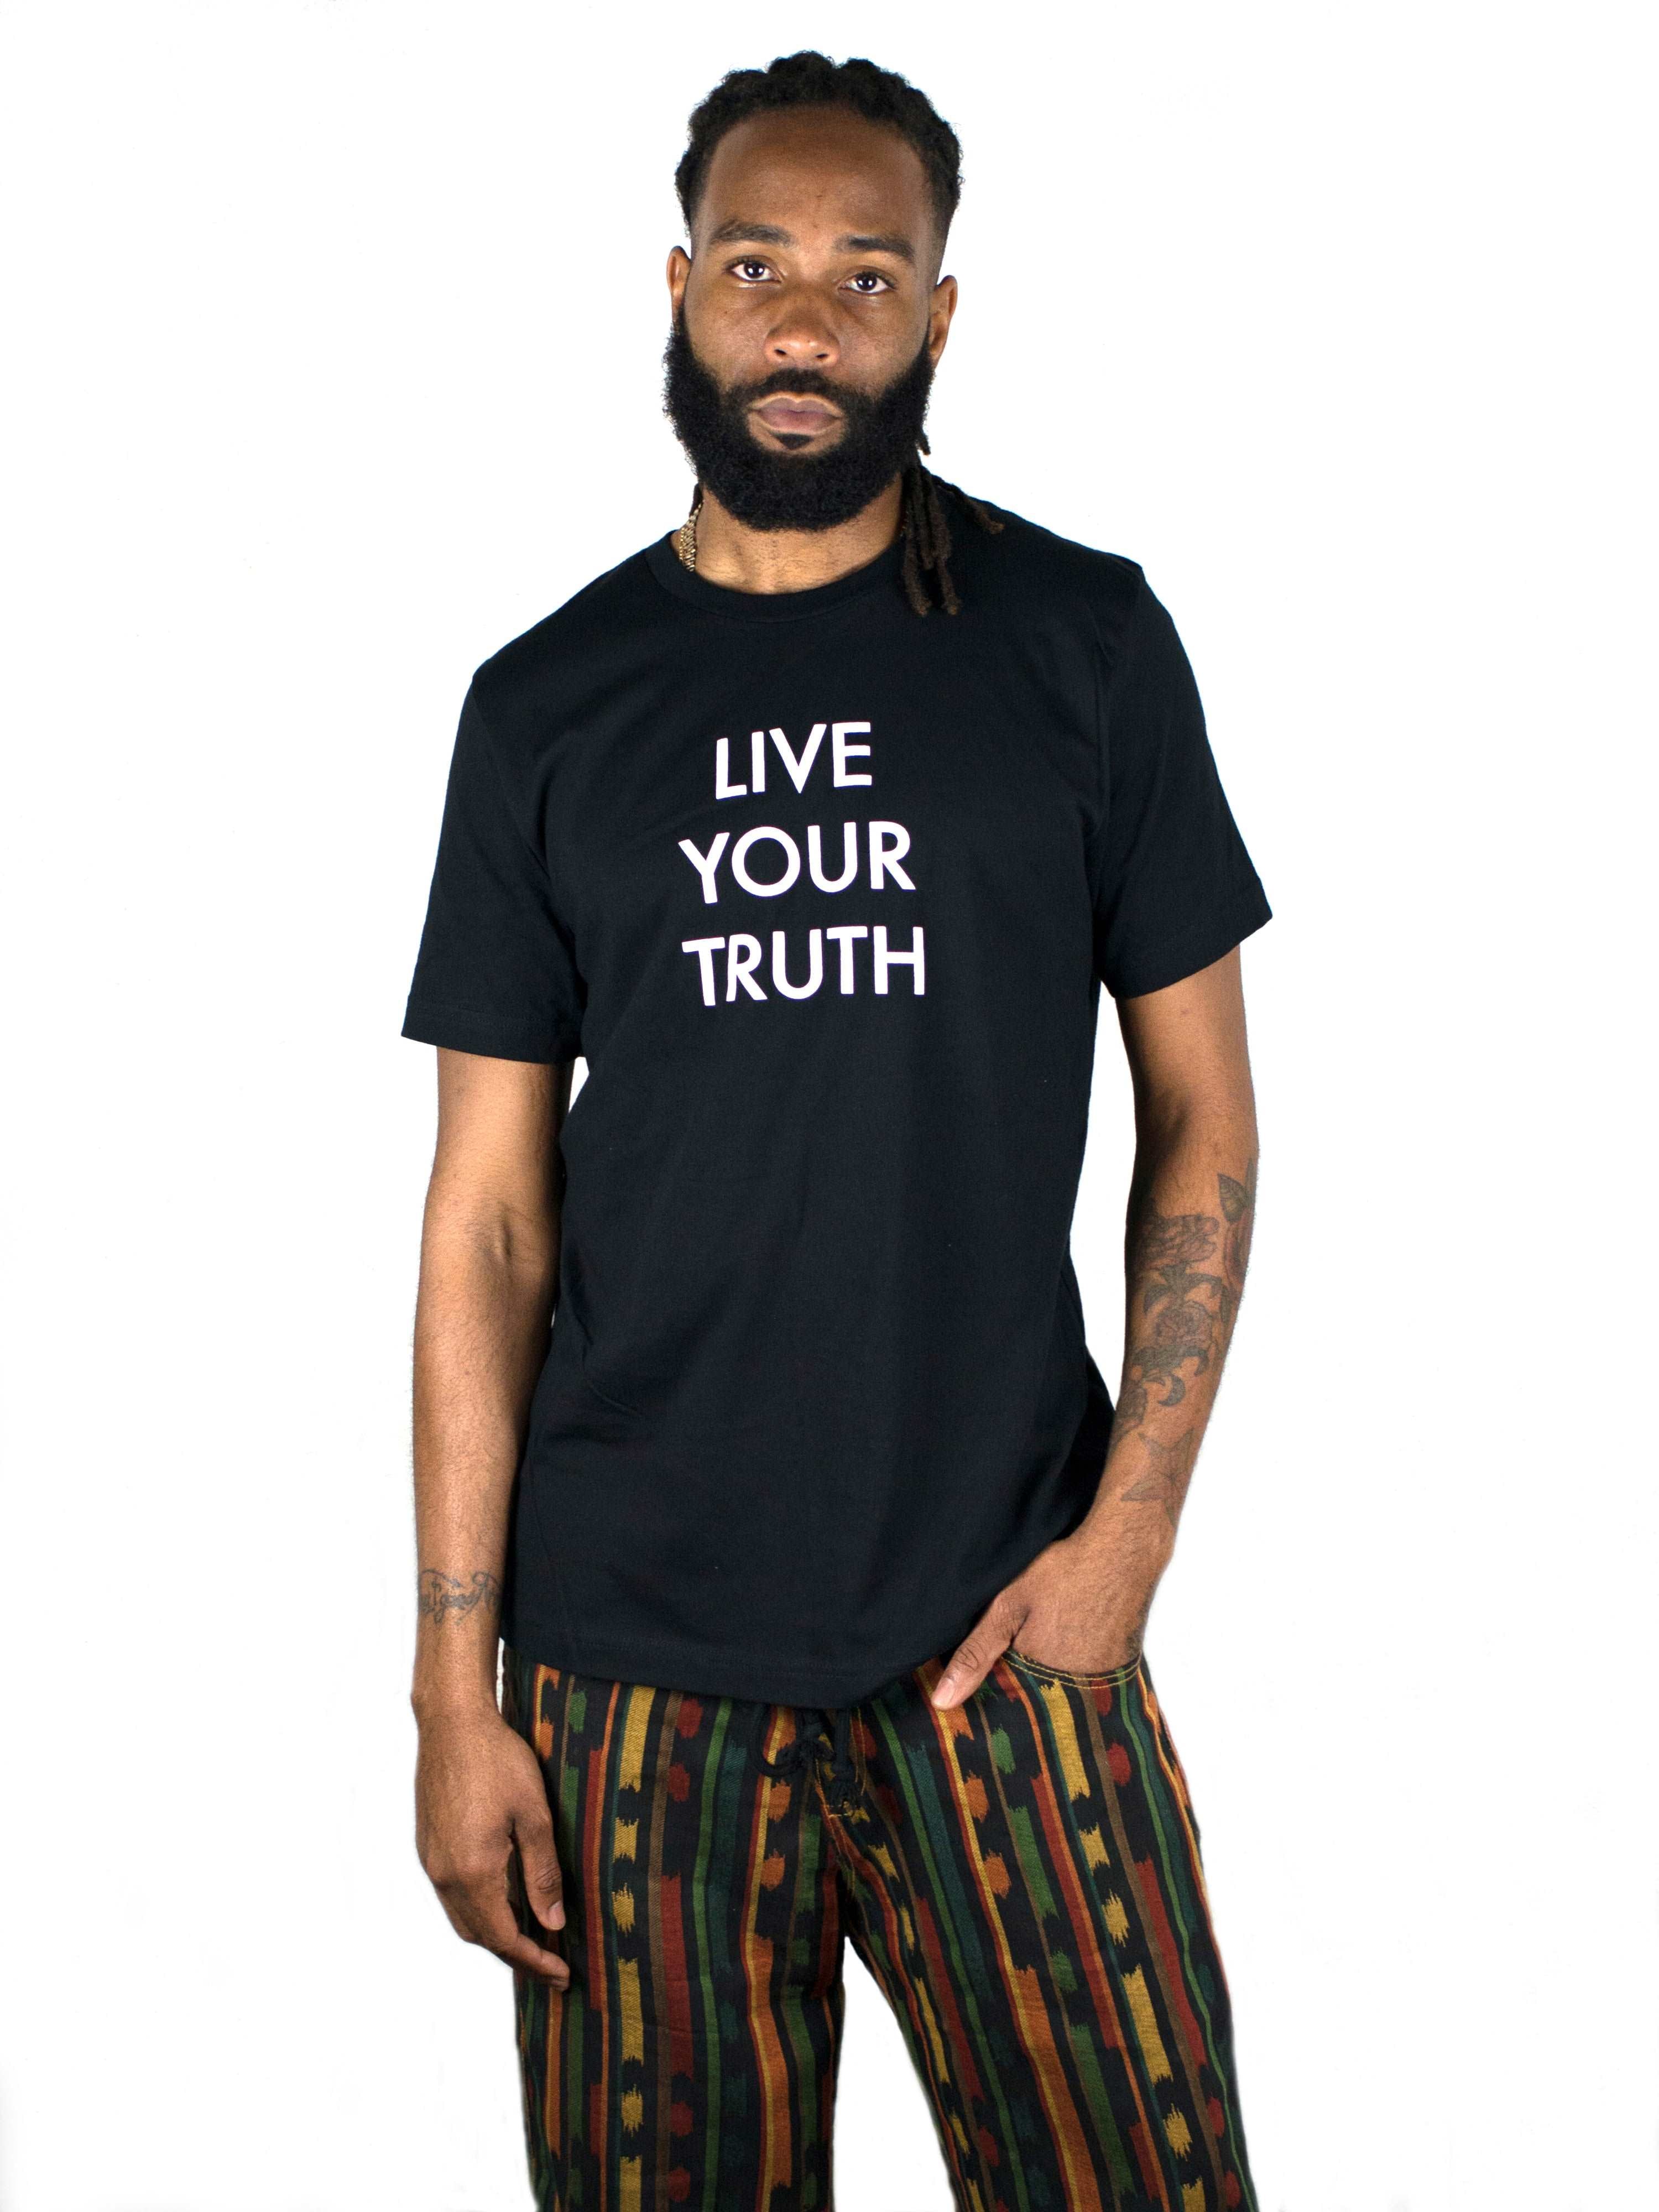 LIVE YOUR TRUTH T-SHIRT.